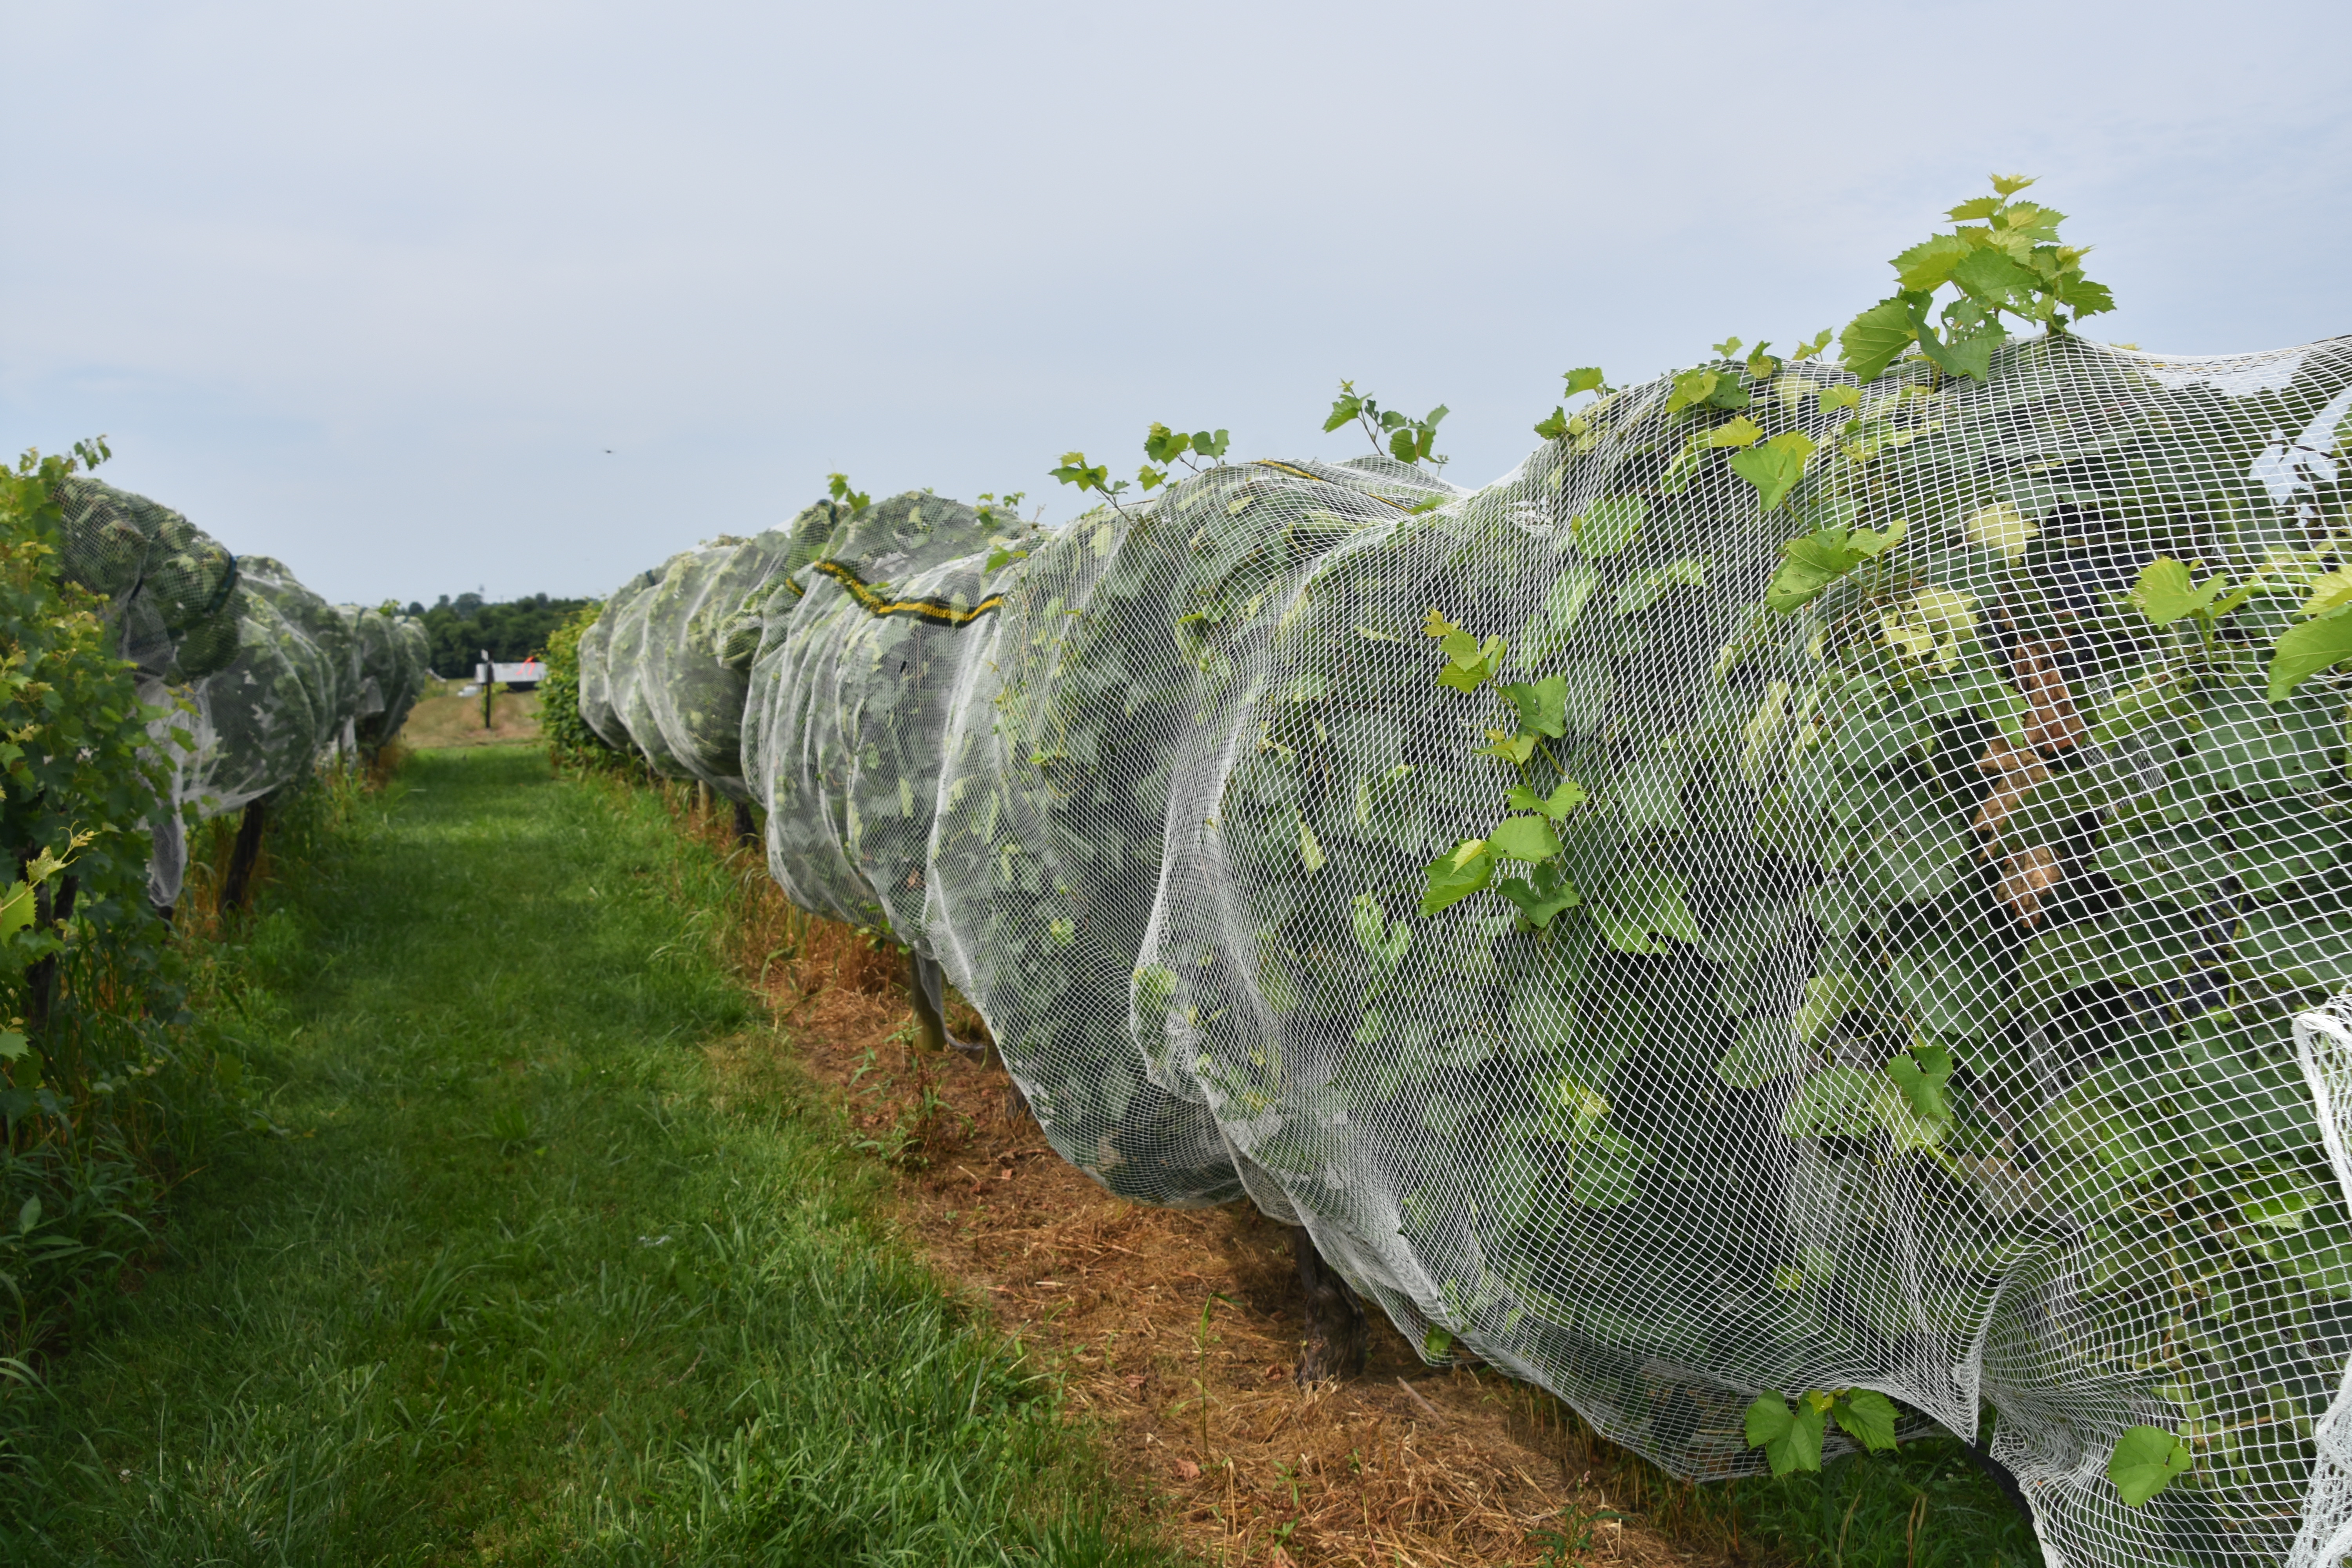 Netting placed over vines to protect from bird damage. 